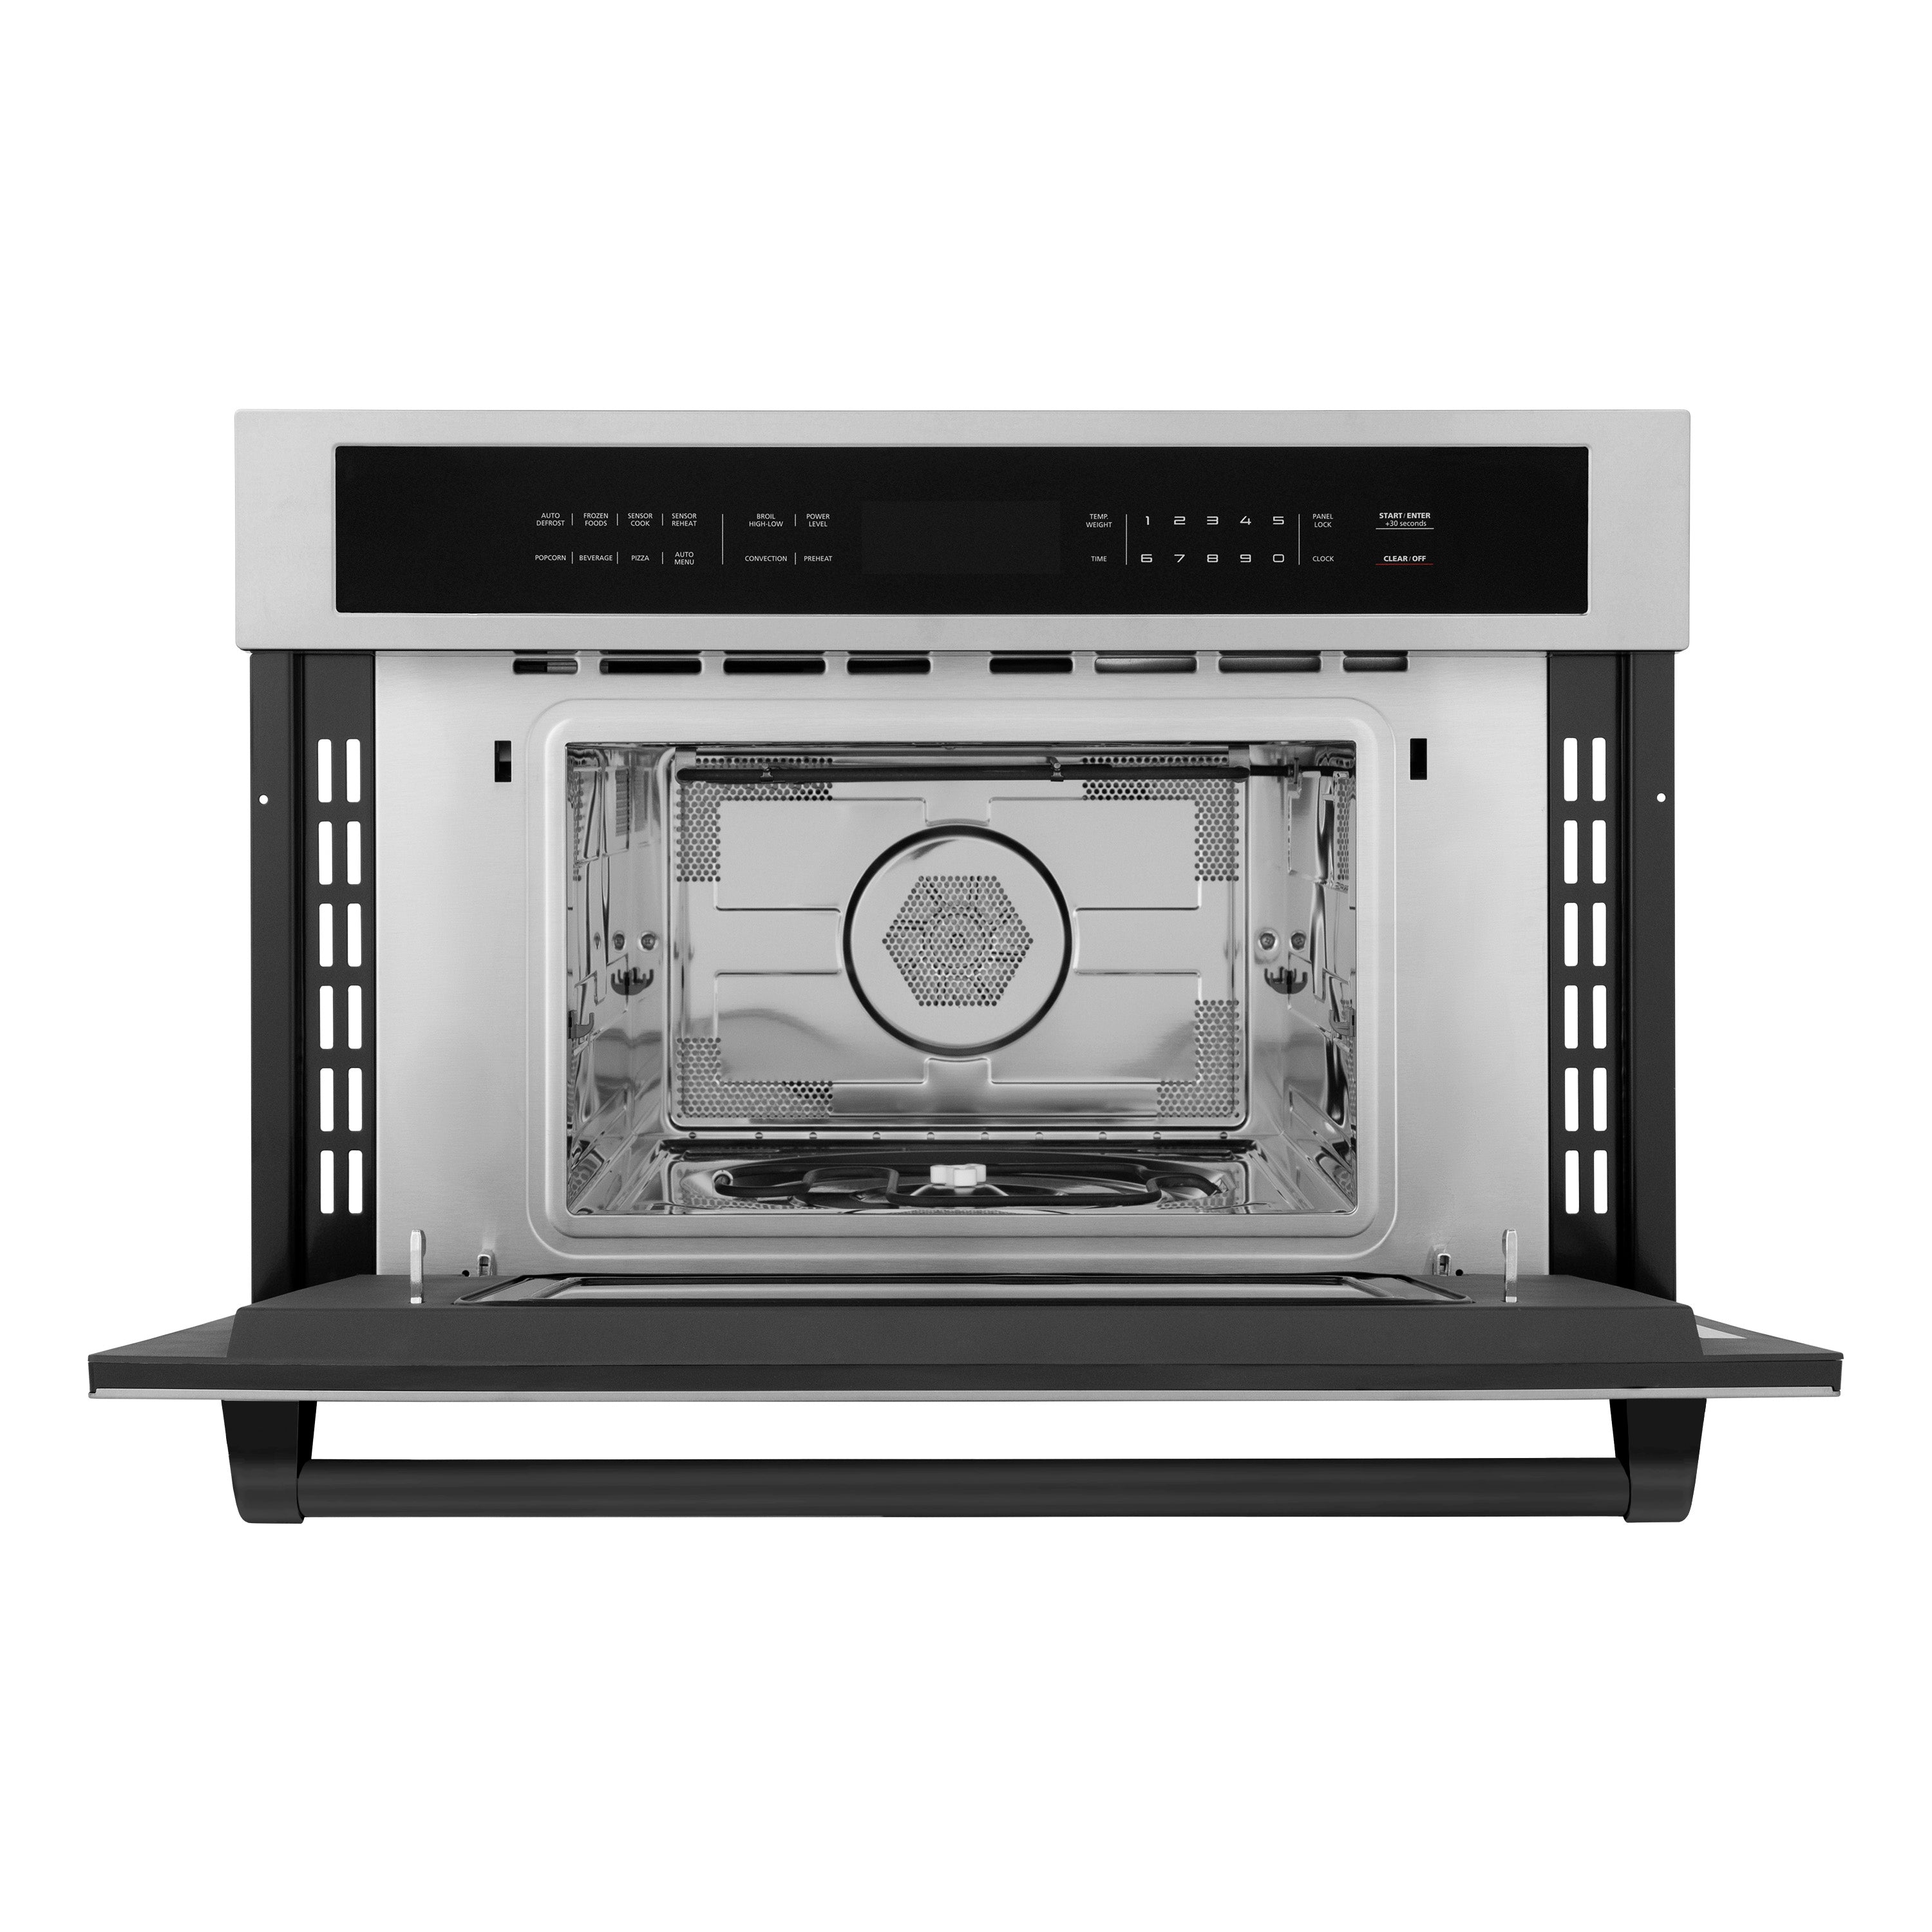 ZLINE Autograph Edition 30 in. 1.6 cu ft. Built-in Convection Microwave Oven in Stainless Steel with Matte Black Accents (MWOZ-30-MB) Front View Door Open